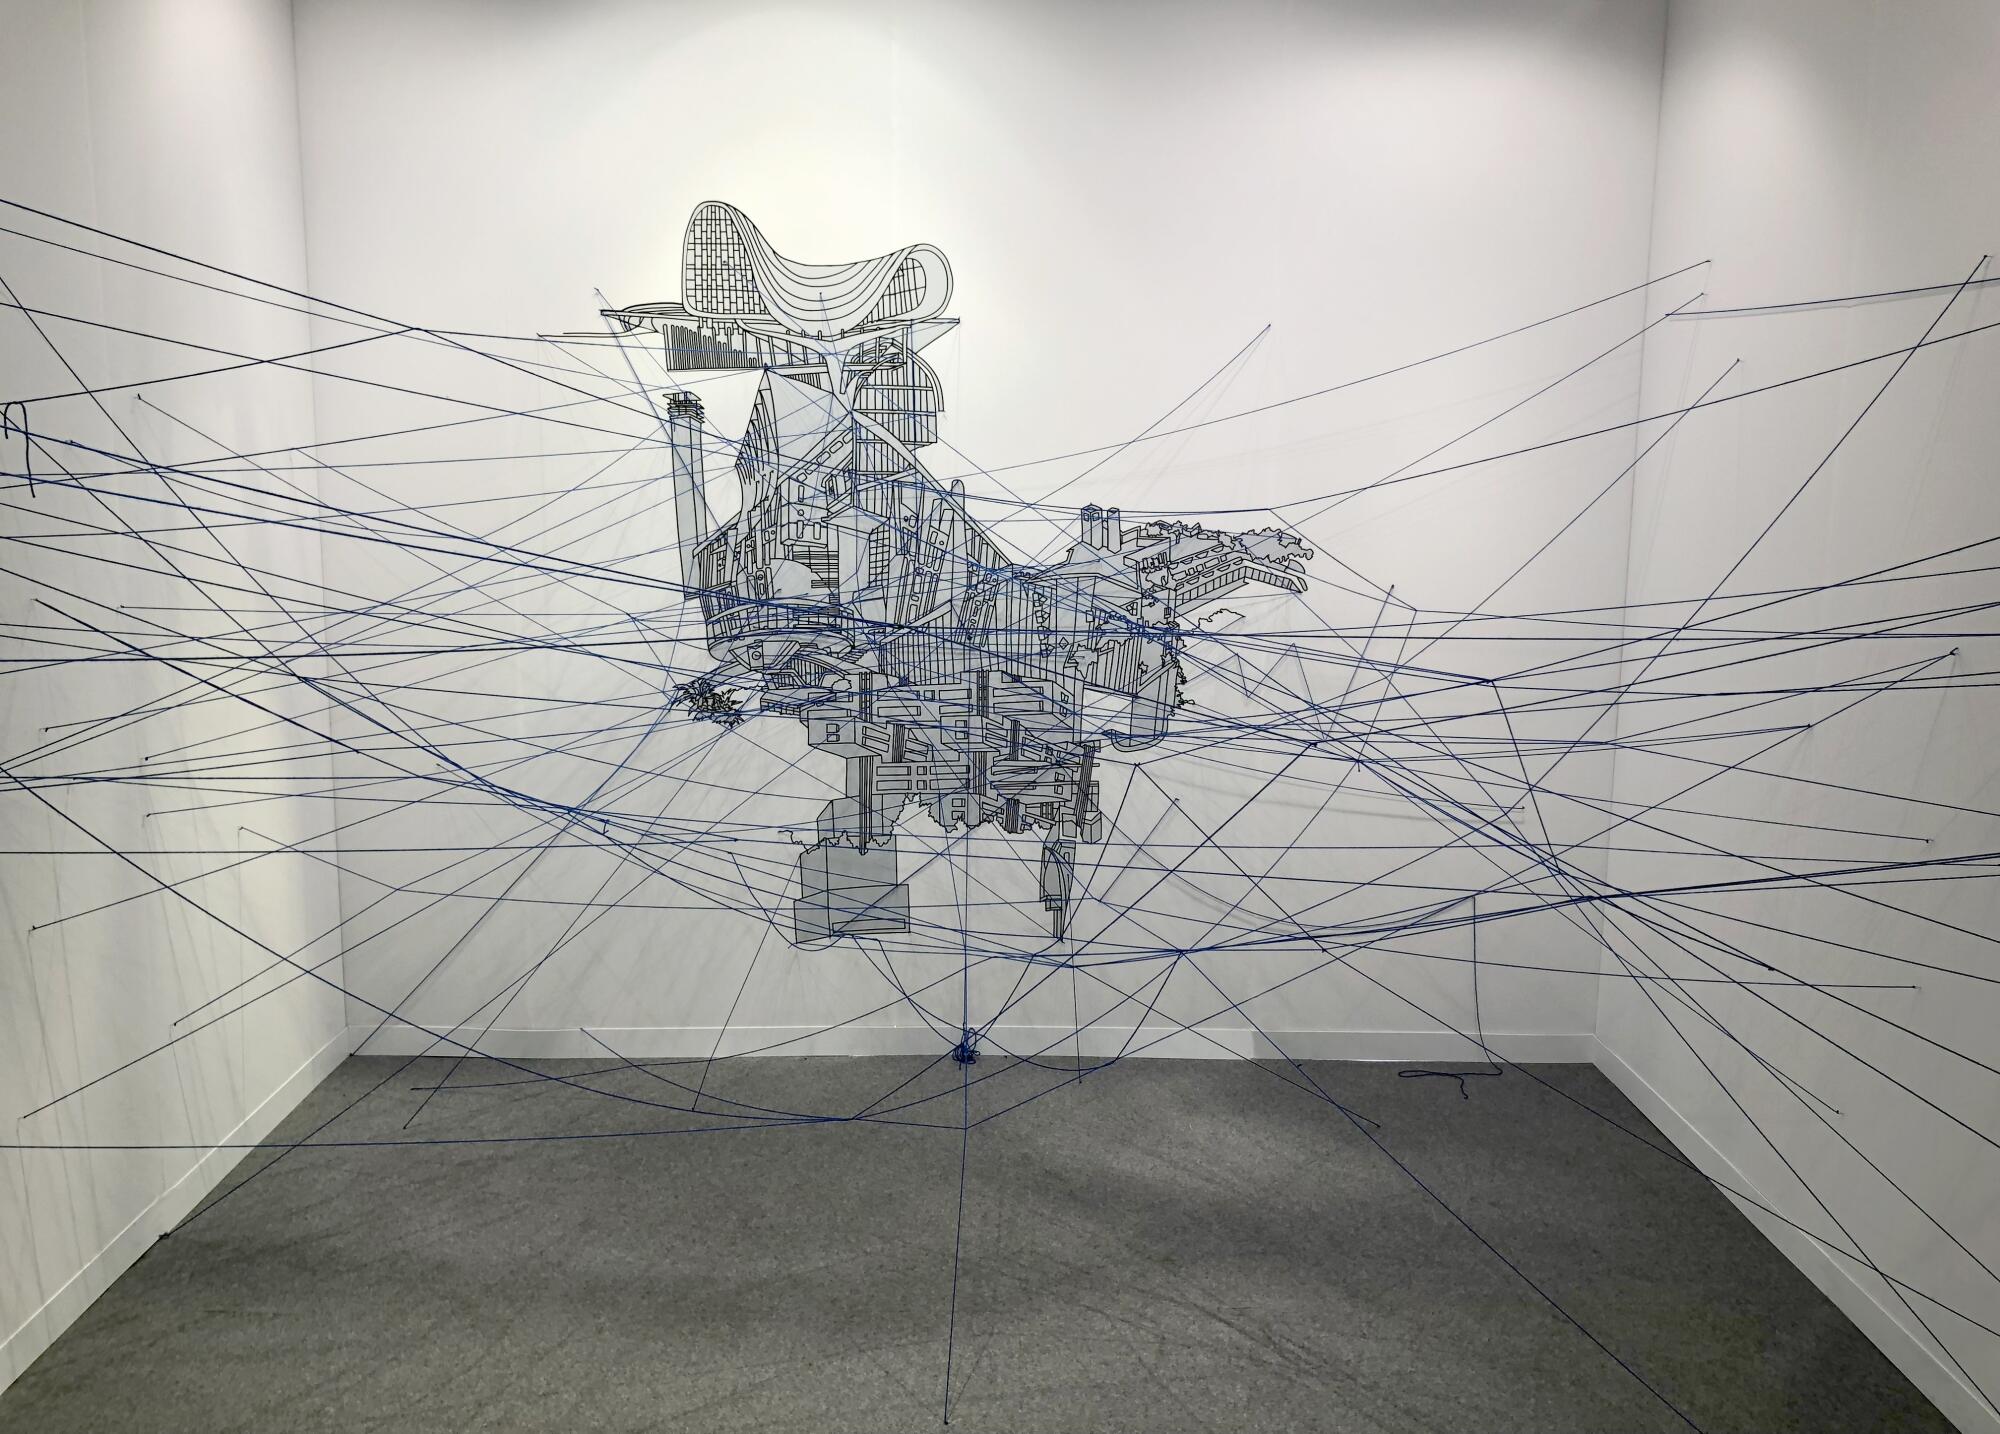 A wall drawing in a gallery booth features a mash-up of building architectures from which emerge a web of strings